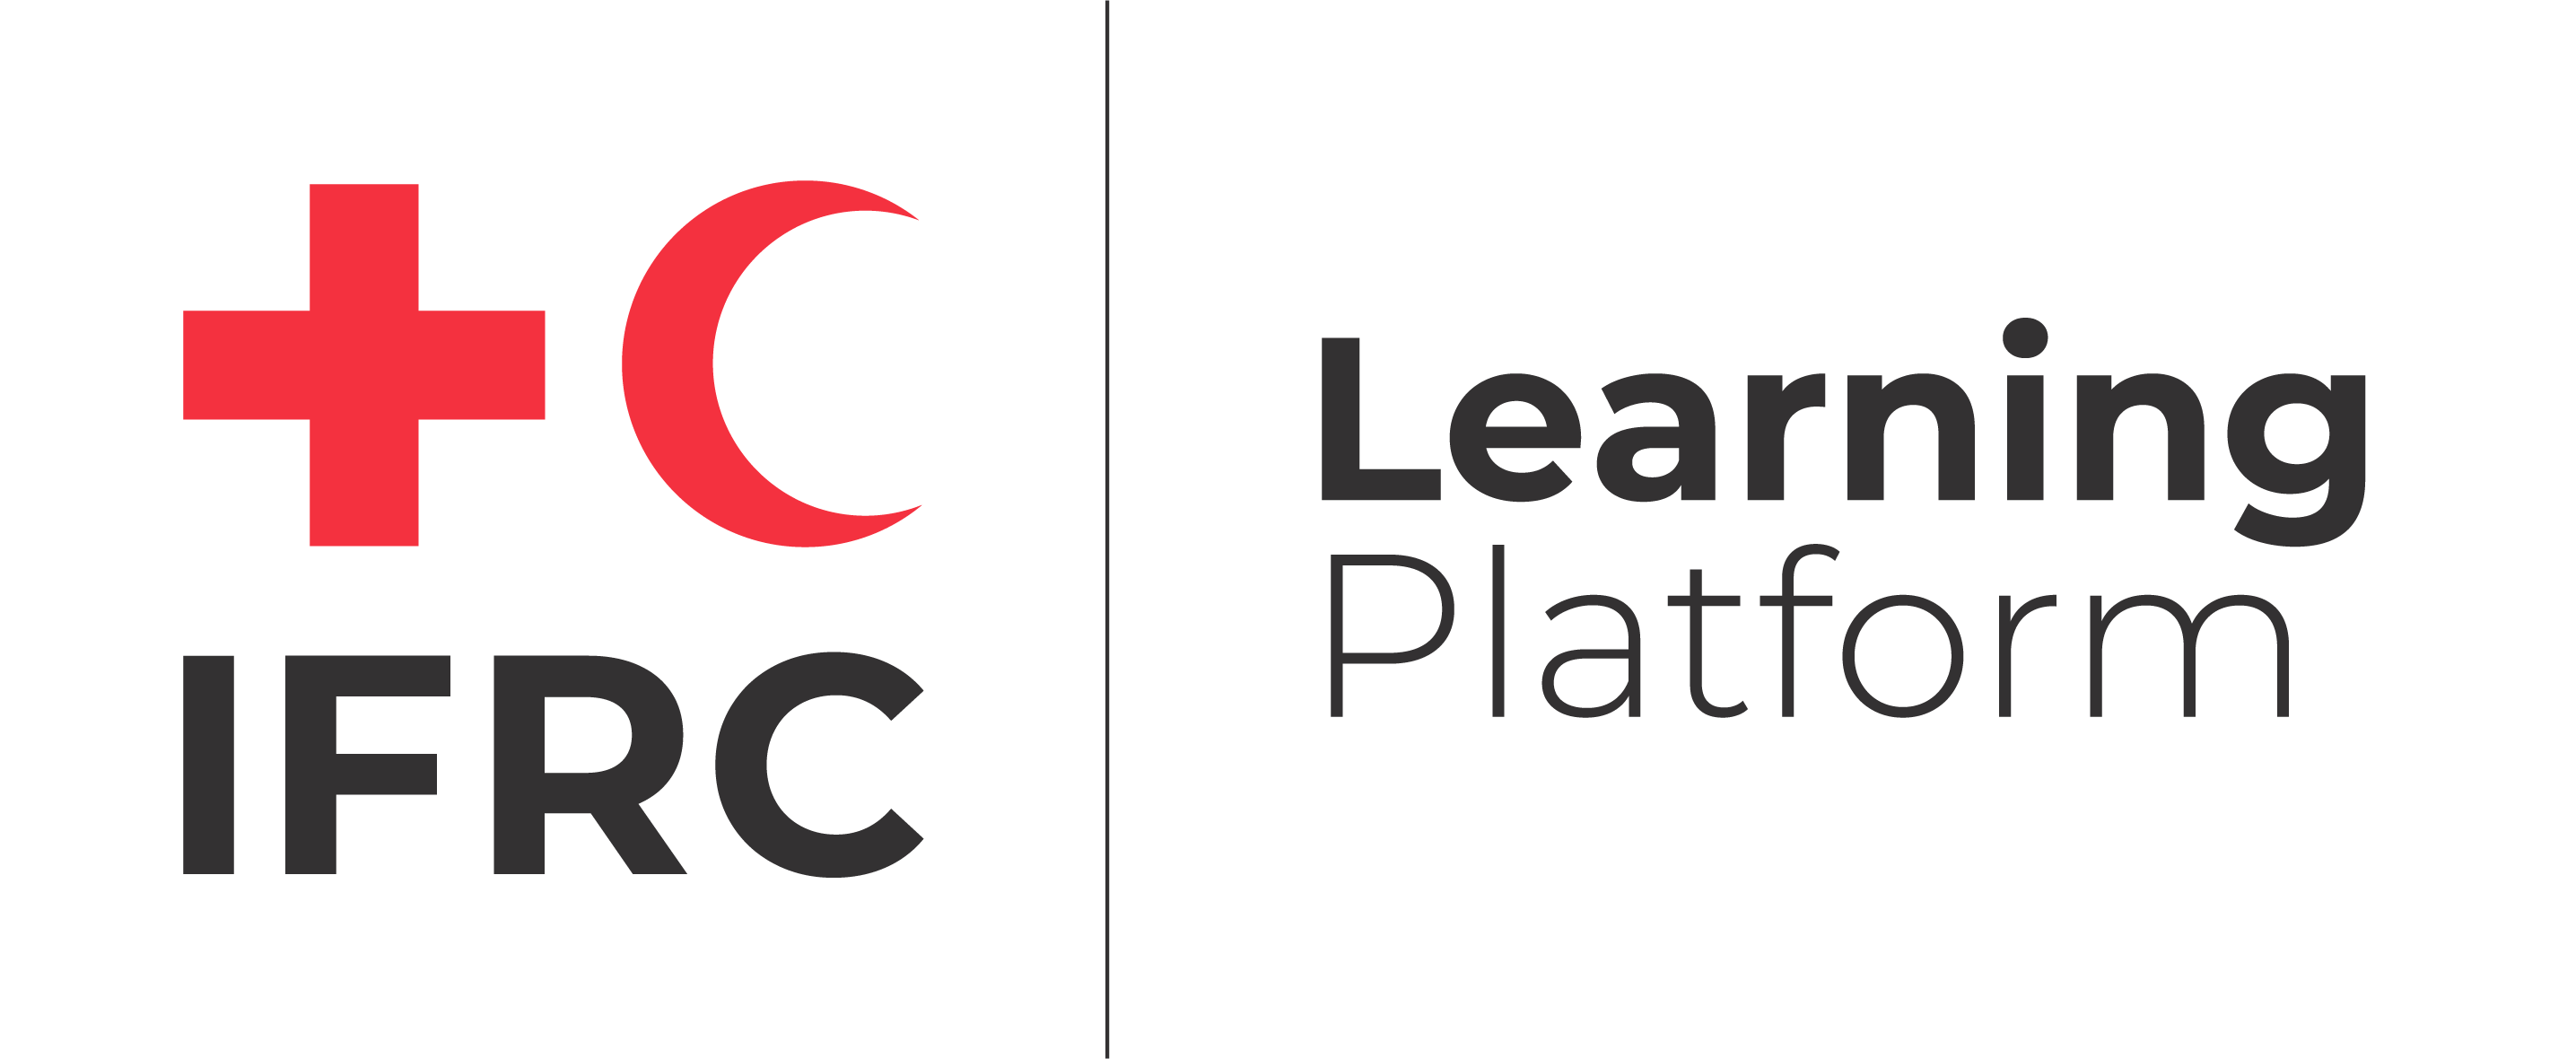 https://ifrc.csod.com/client/ifrc/images/LearningPlatform.png